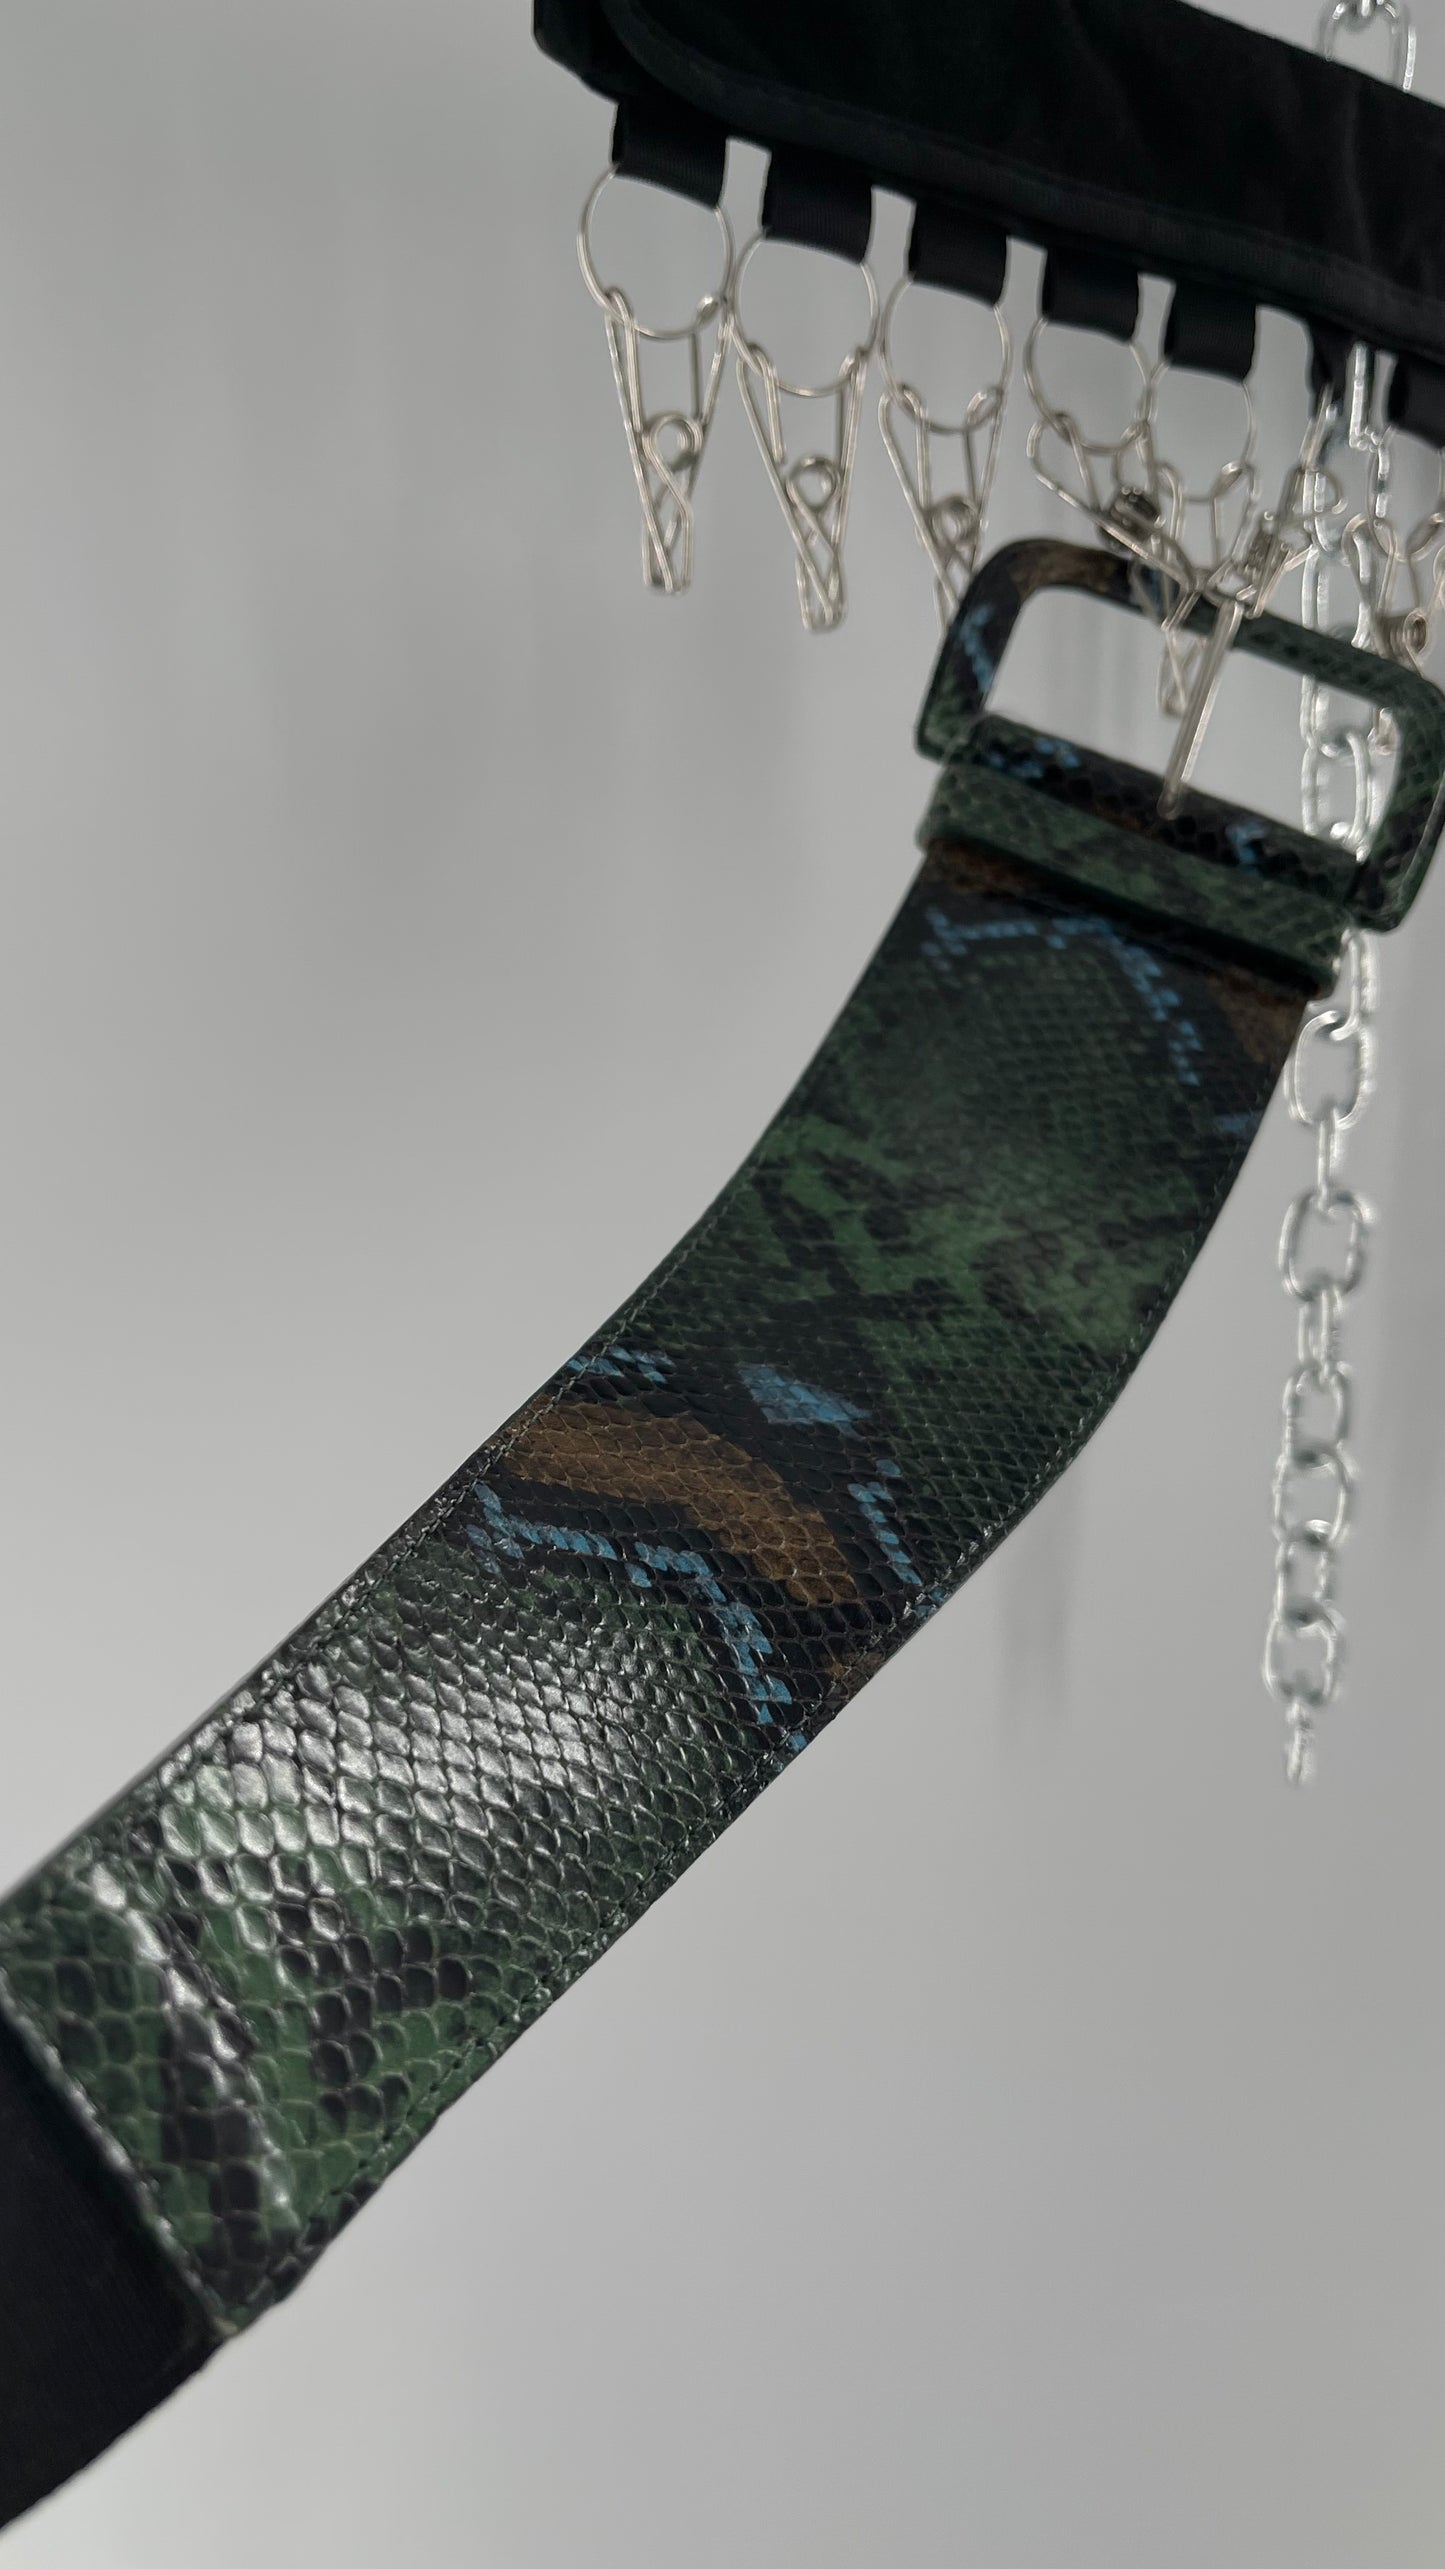 Streets Ahead Green/Blue/Tan Snakeskin Waist Belt with Exaggerated Buckle (XS)